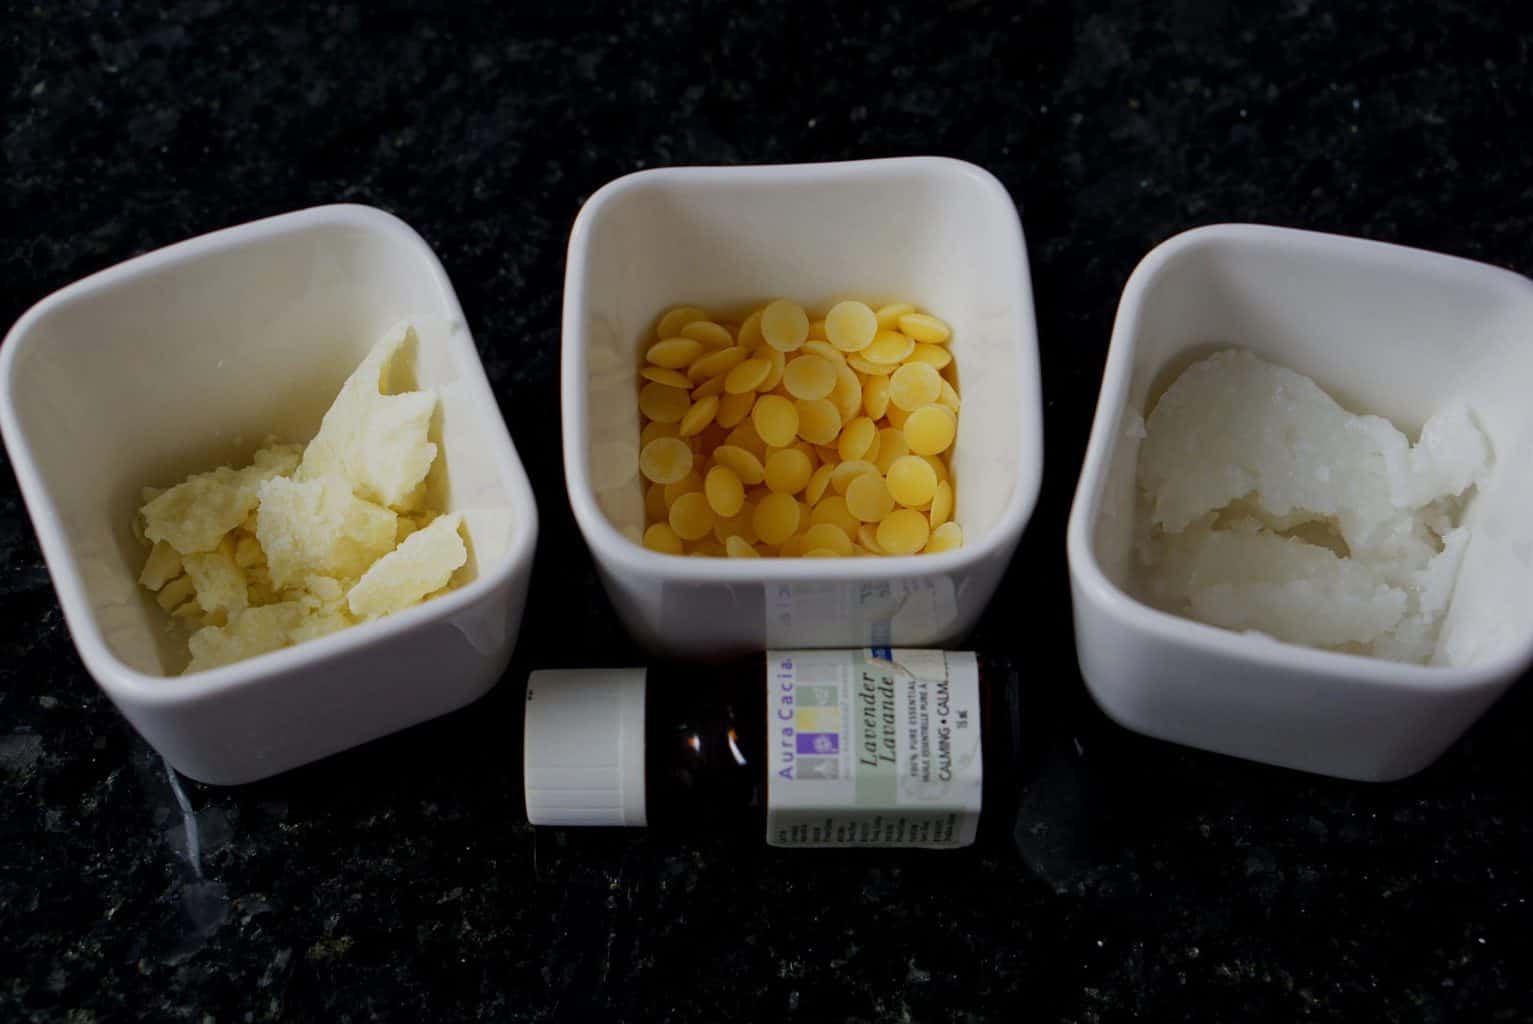 Ingredients for Lip Balm